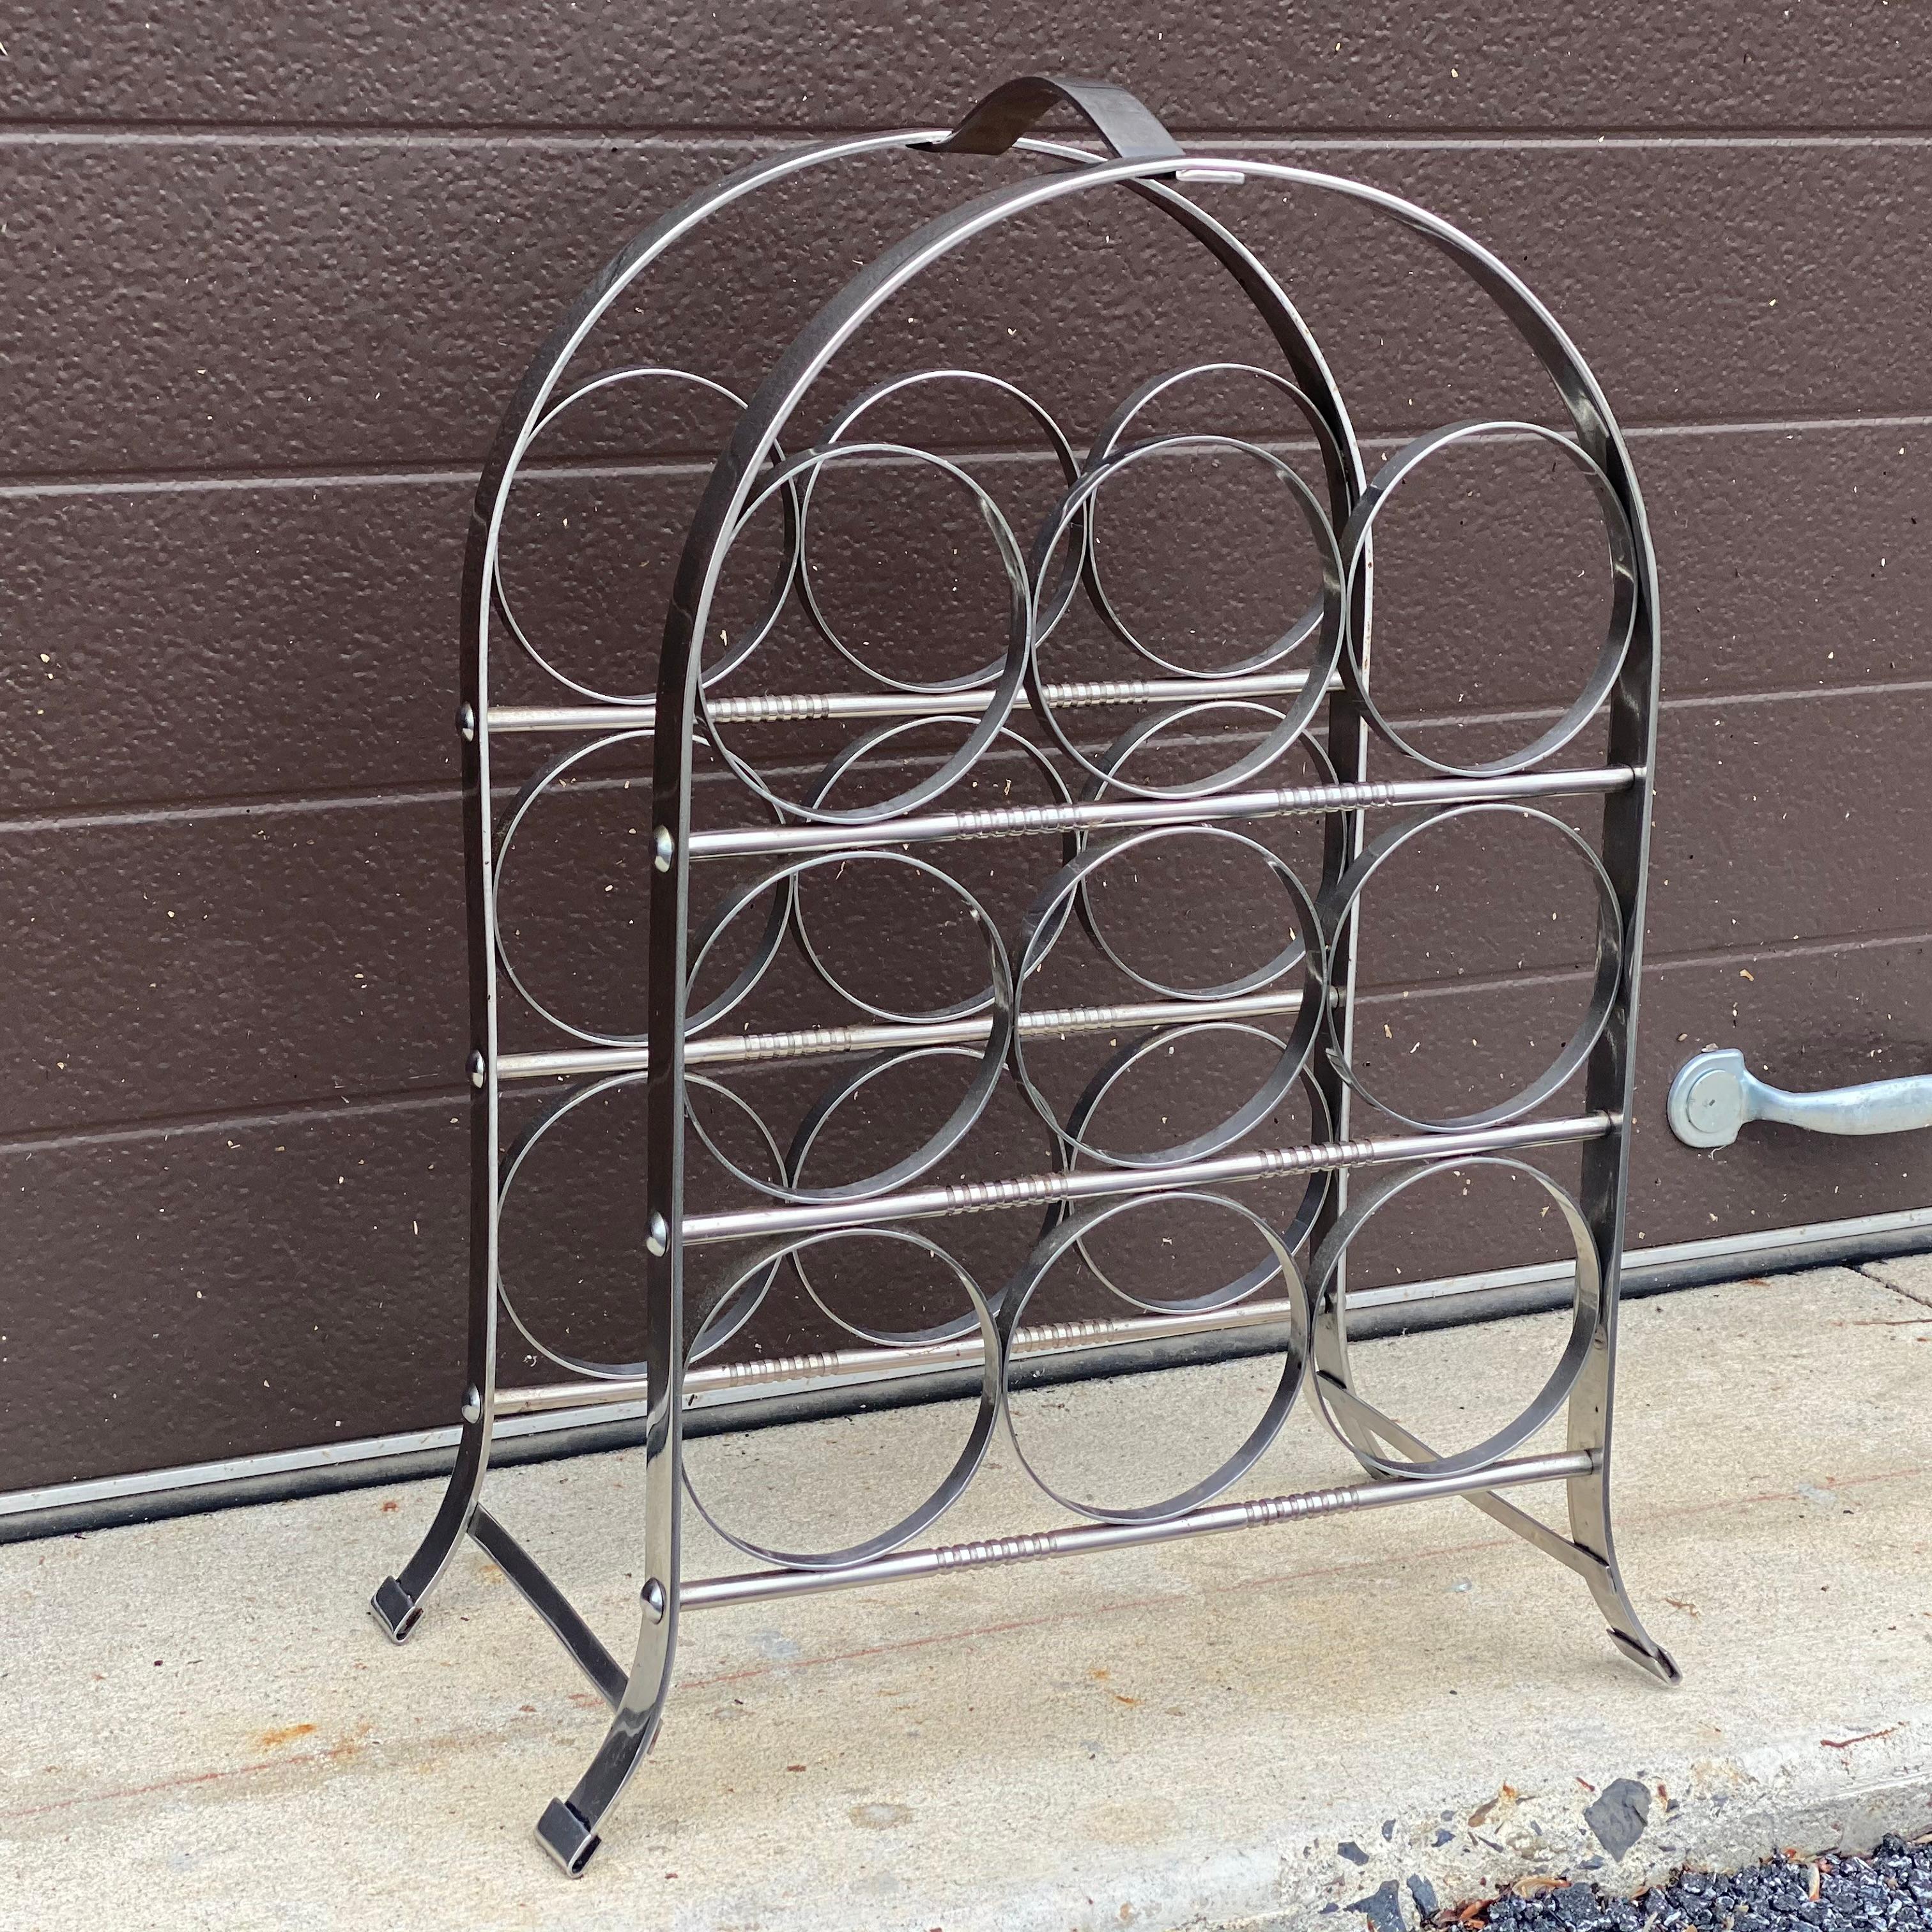 This vintage chrome tabletop wine rack circa 1960s-70s holds 9 bottles of wine and is in very good condition with heavy construction 

Measures 18.25” high, 13.75” wide and 7.25” deep.
